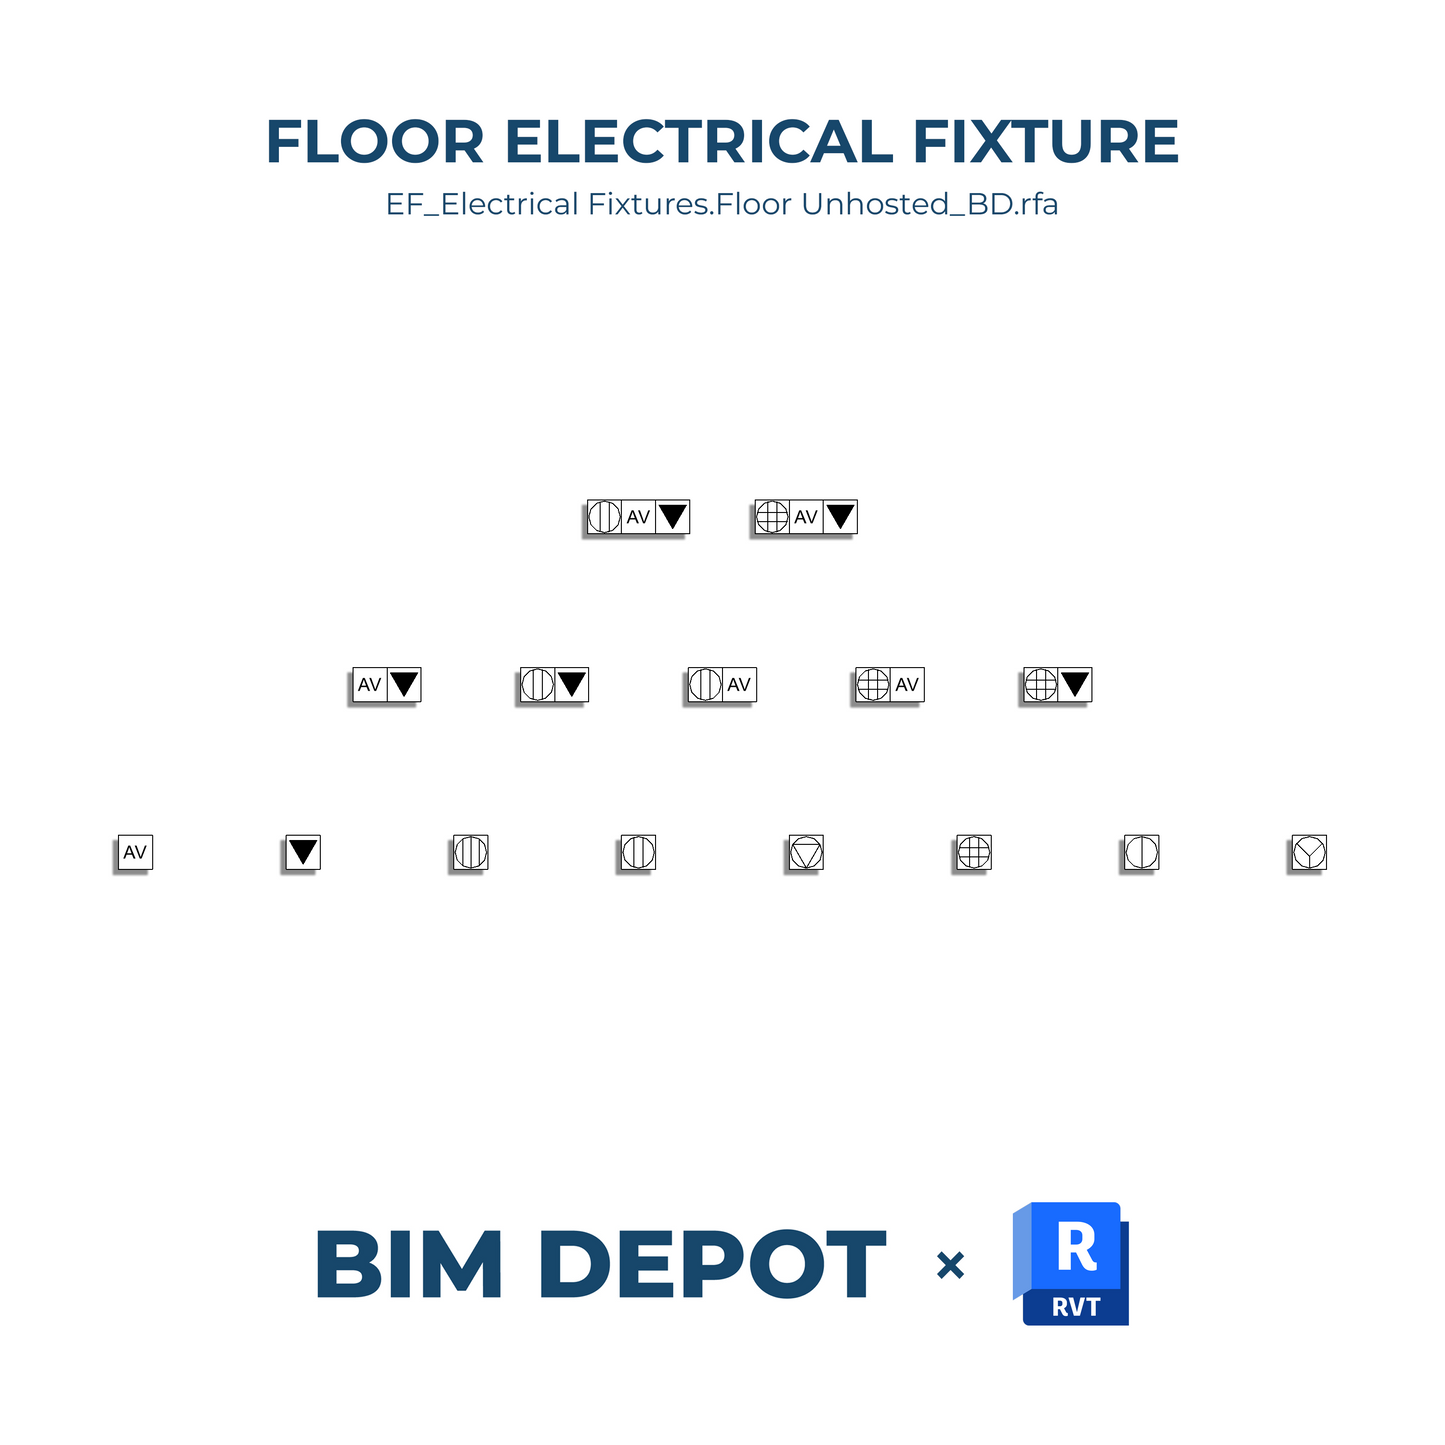 Electrical Fixture - Floor (Not Hosted)